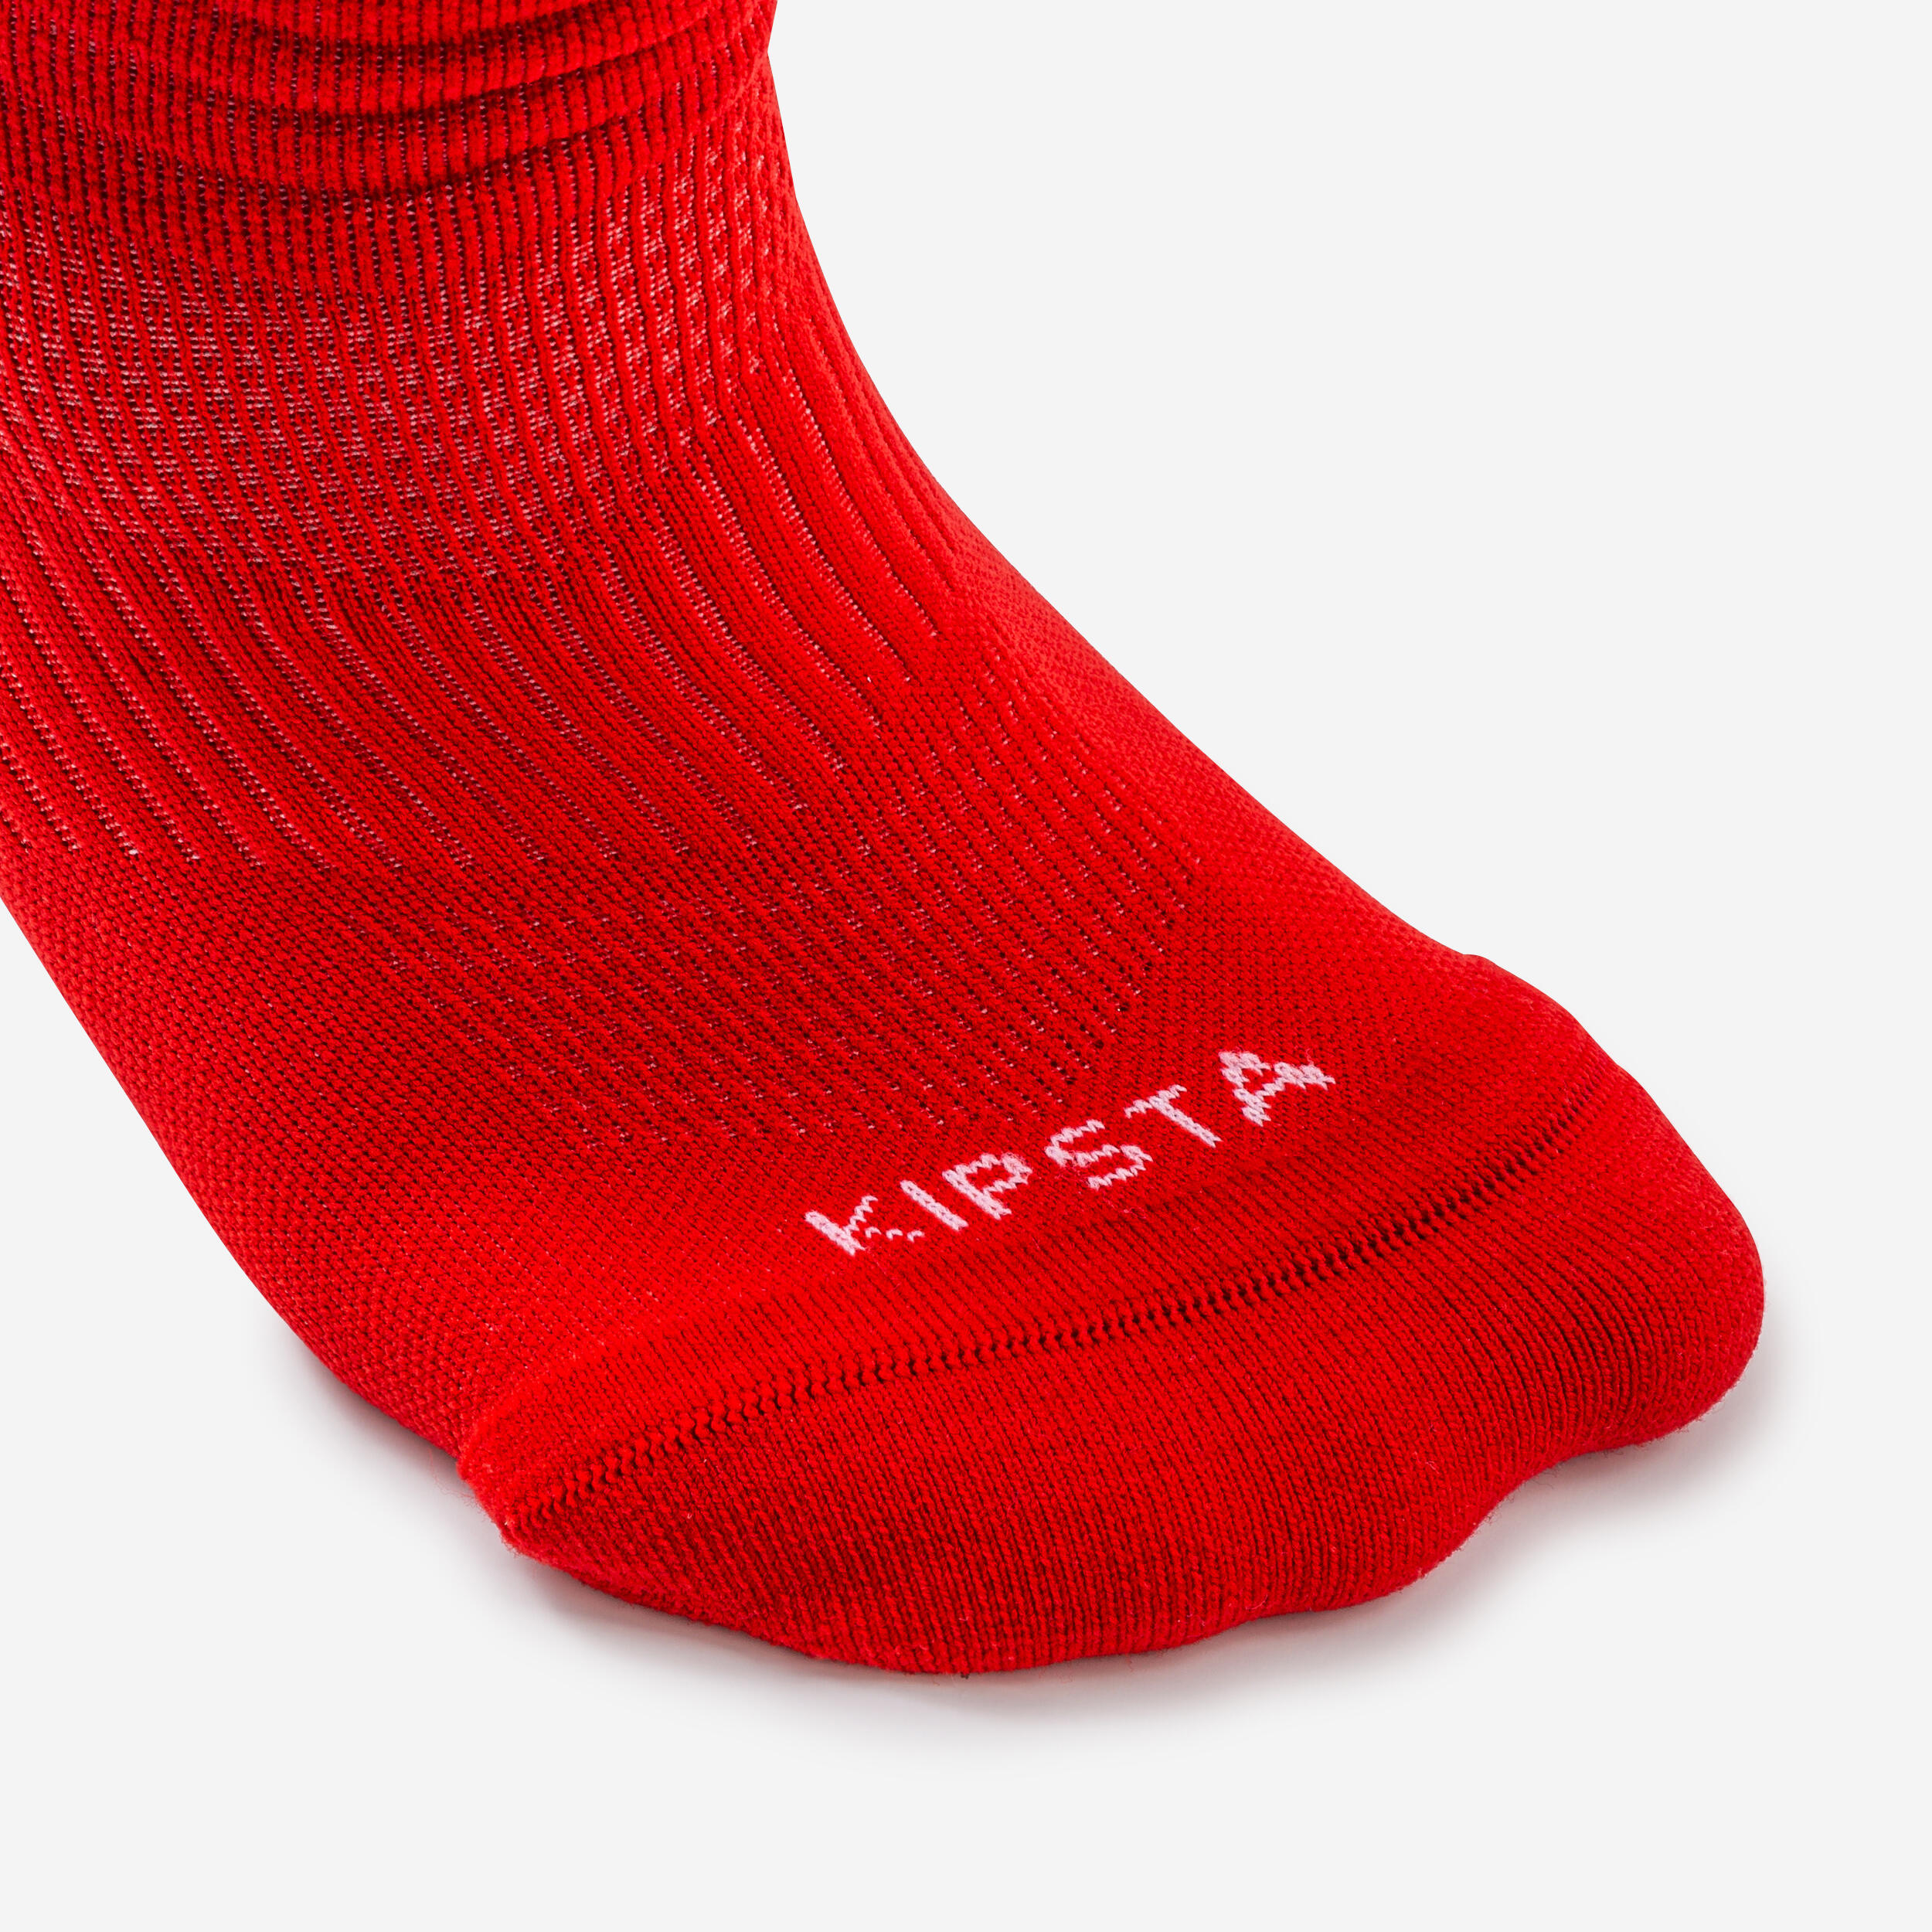 Adult High and Grippy Football Socks Viralto II - Red 5/5